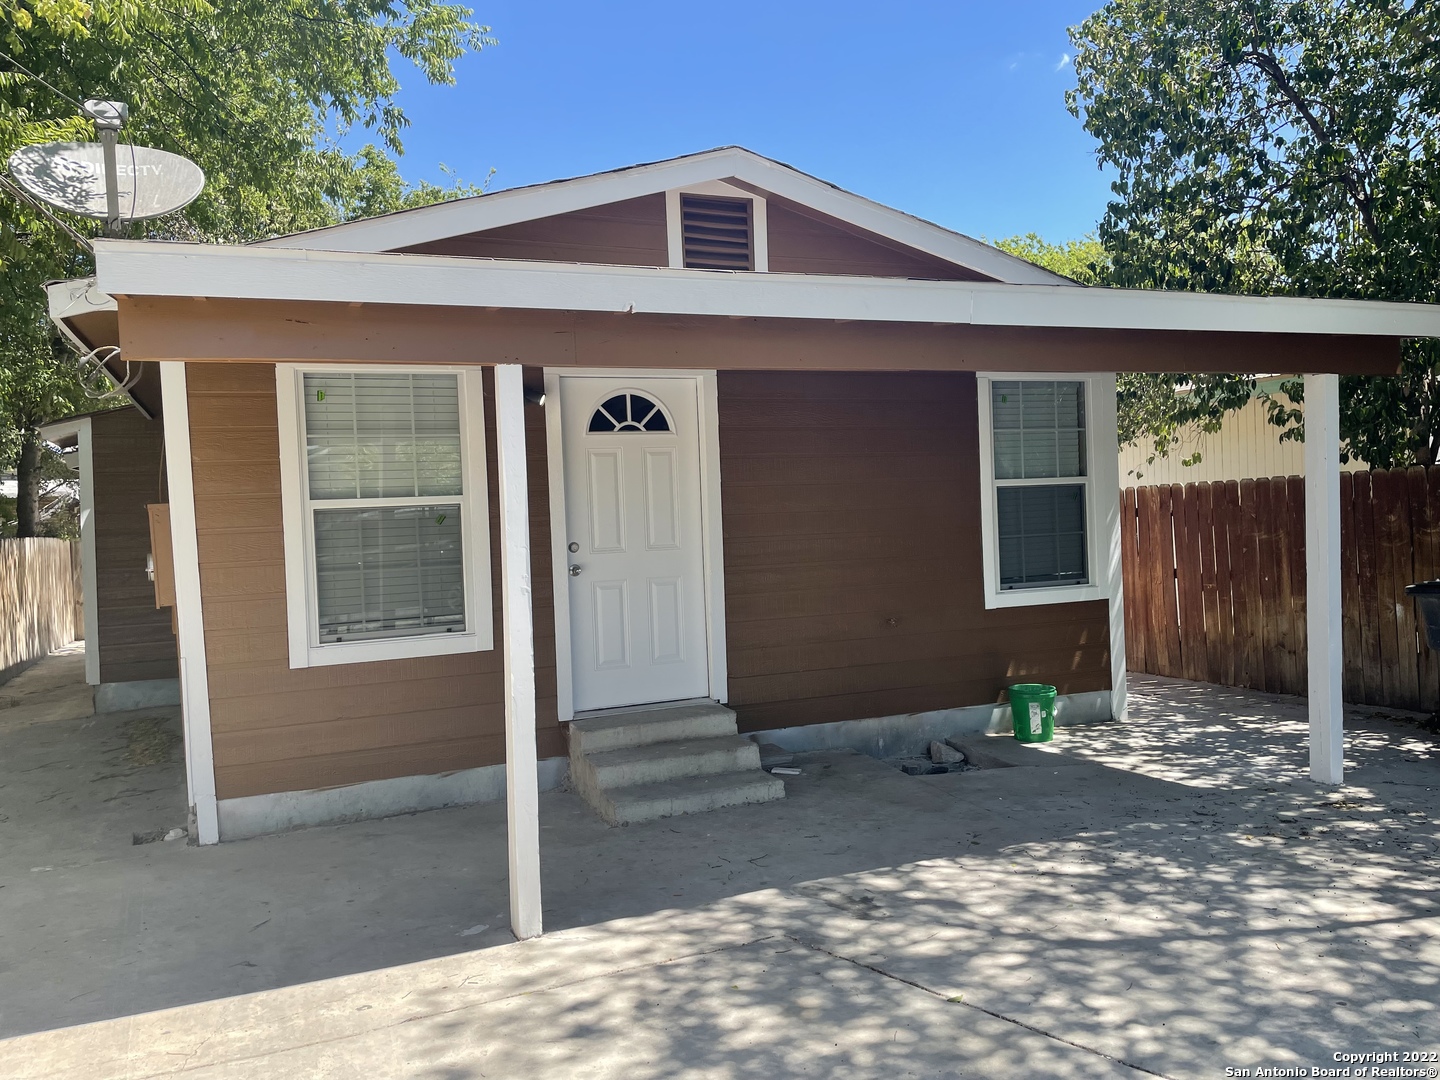 Great house for investor or 1st time homeowner. This 2 bedroom and 1 full bath is new. House has been rehabilitated. Rented house for $900 month. Fresh paint, private fence and covered patio for the BBQ's.